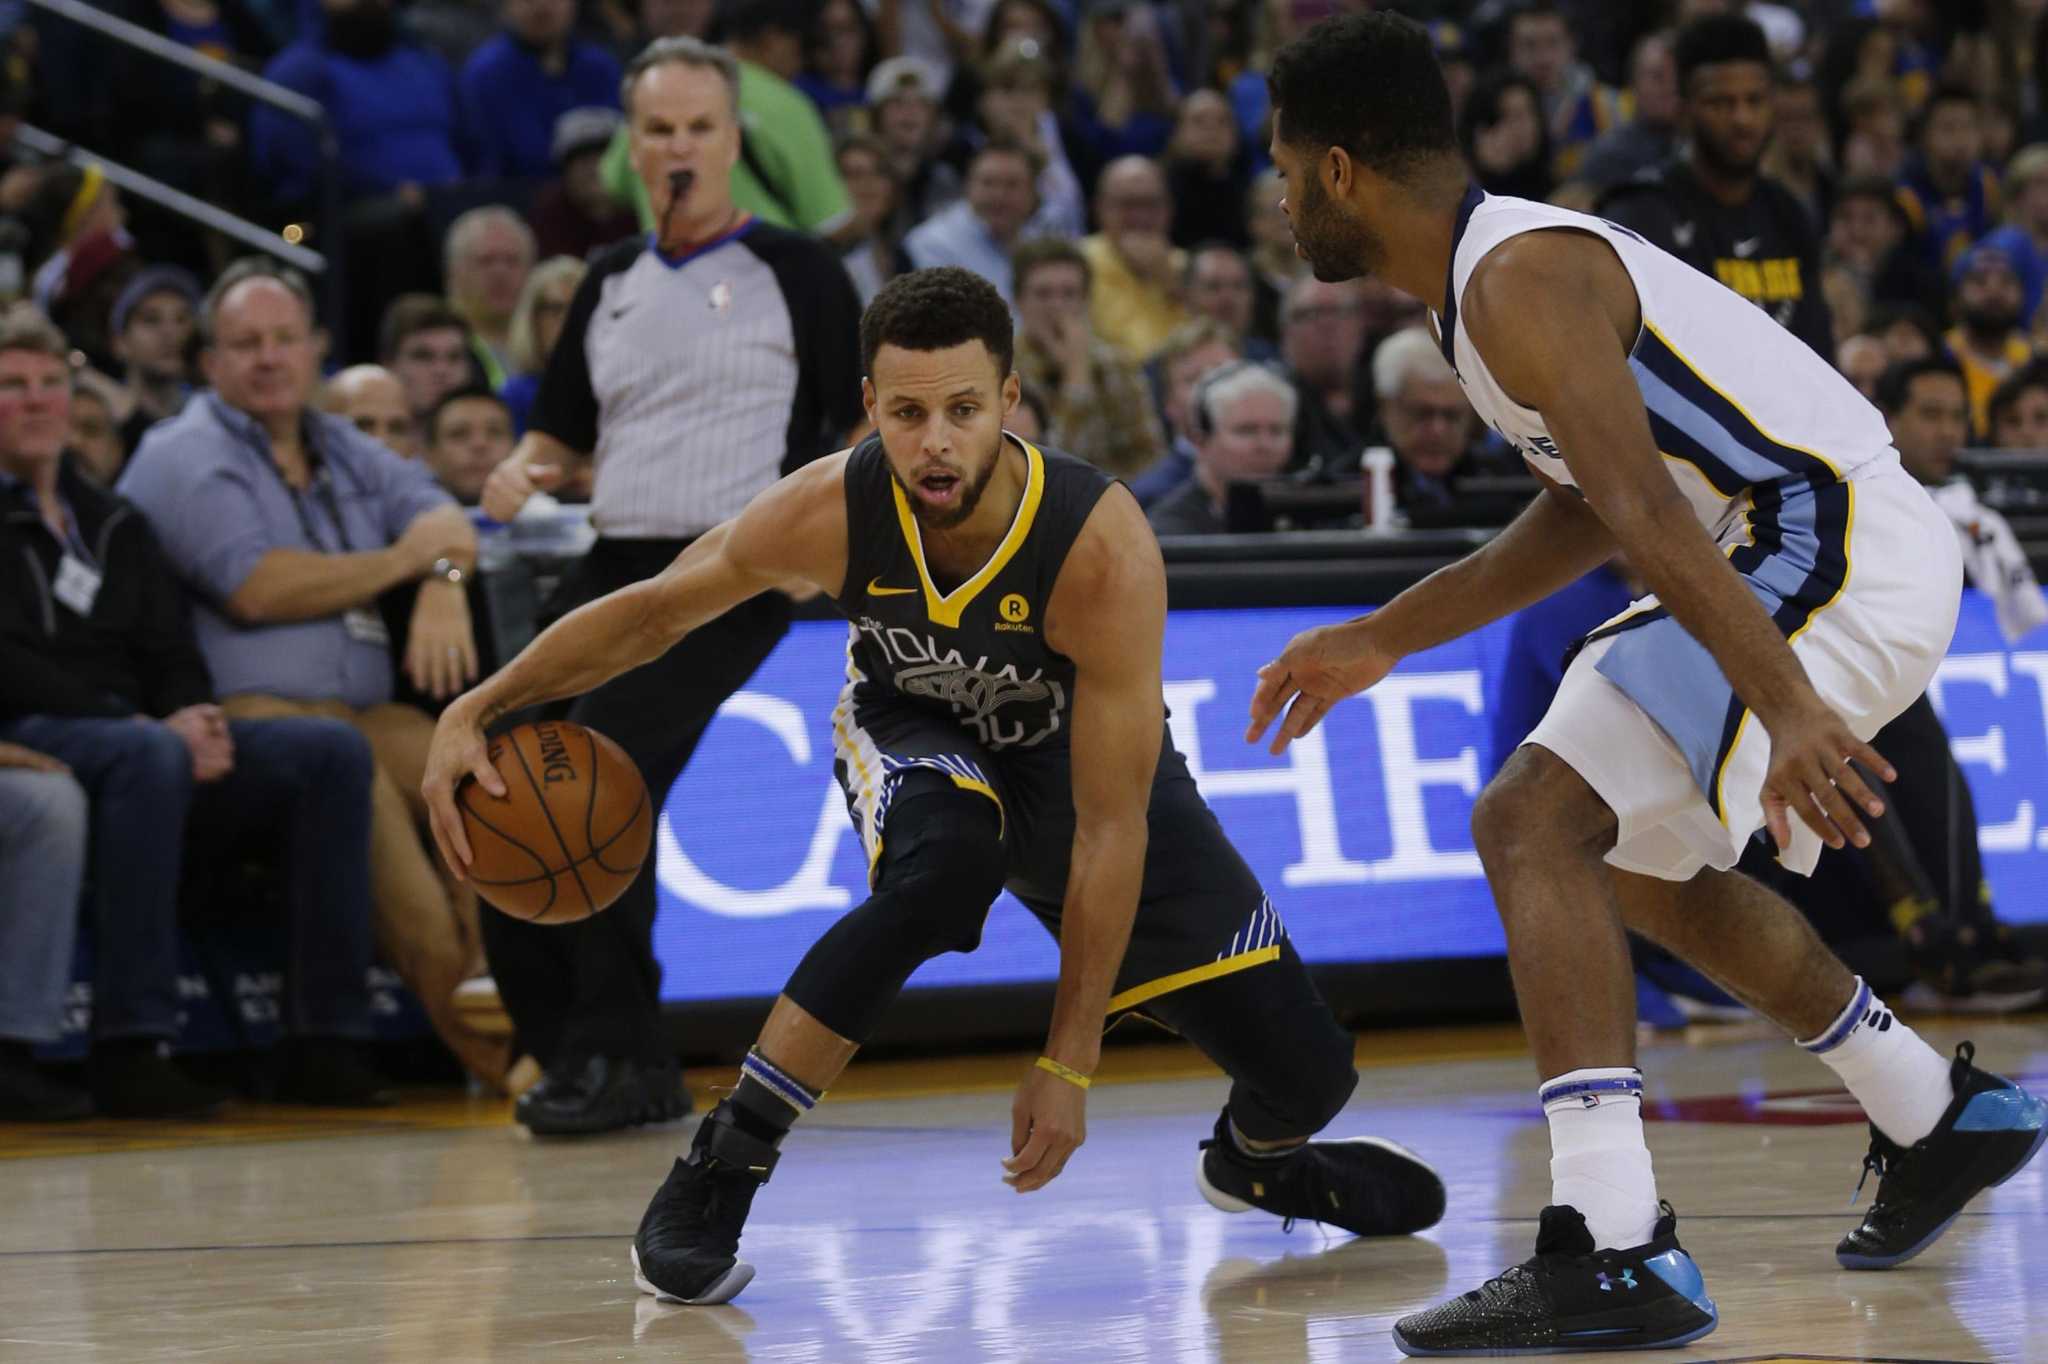 Stephen Curry dazzles in first game back from injury as Warriors rout Memphis - SFGate